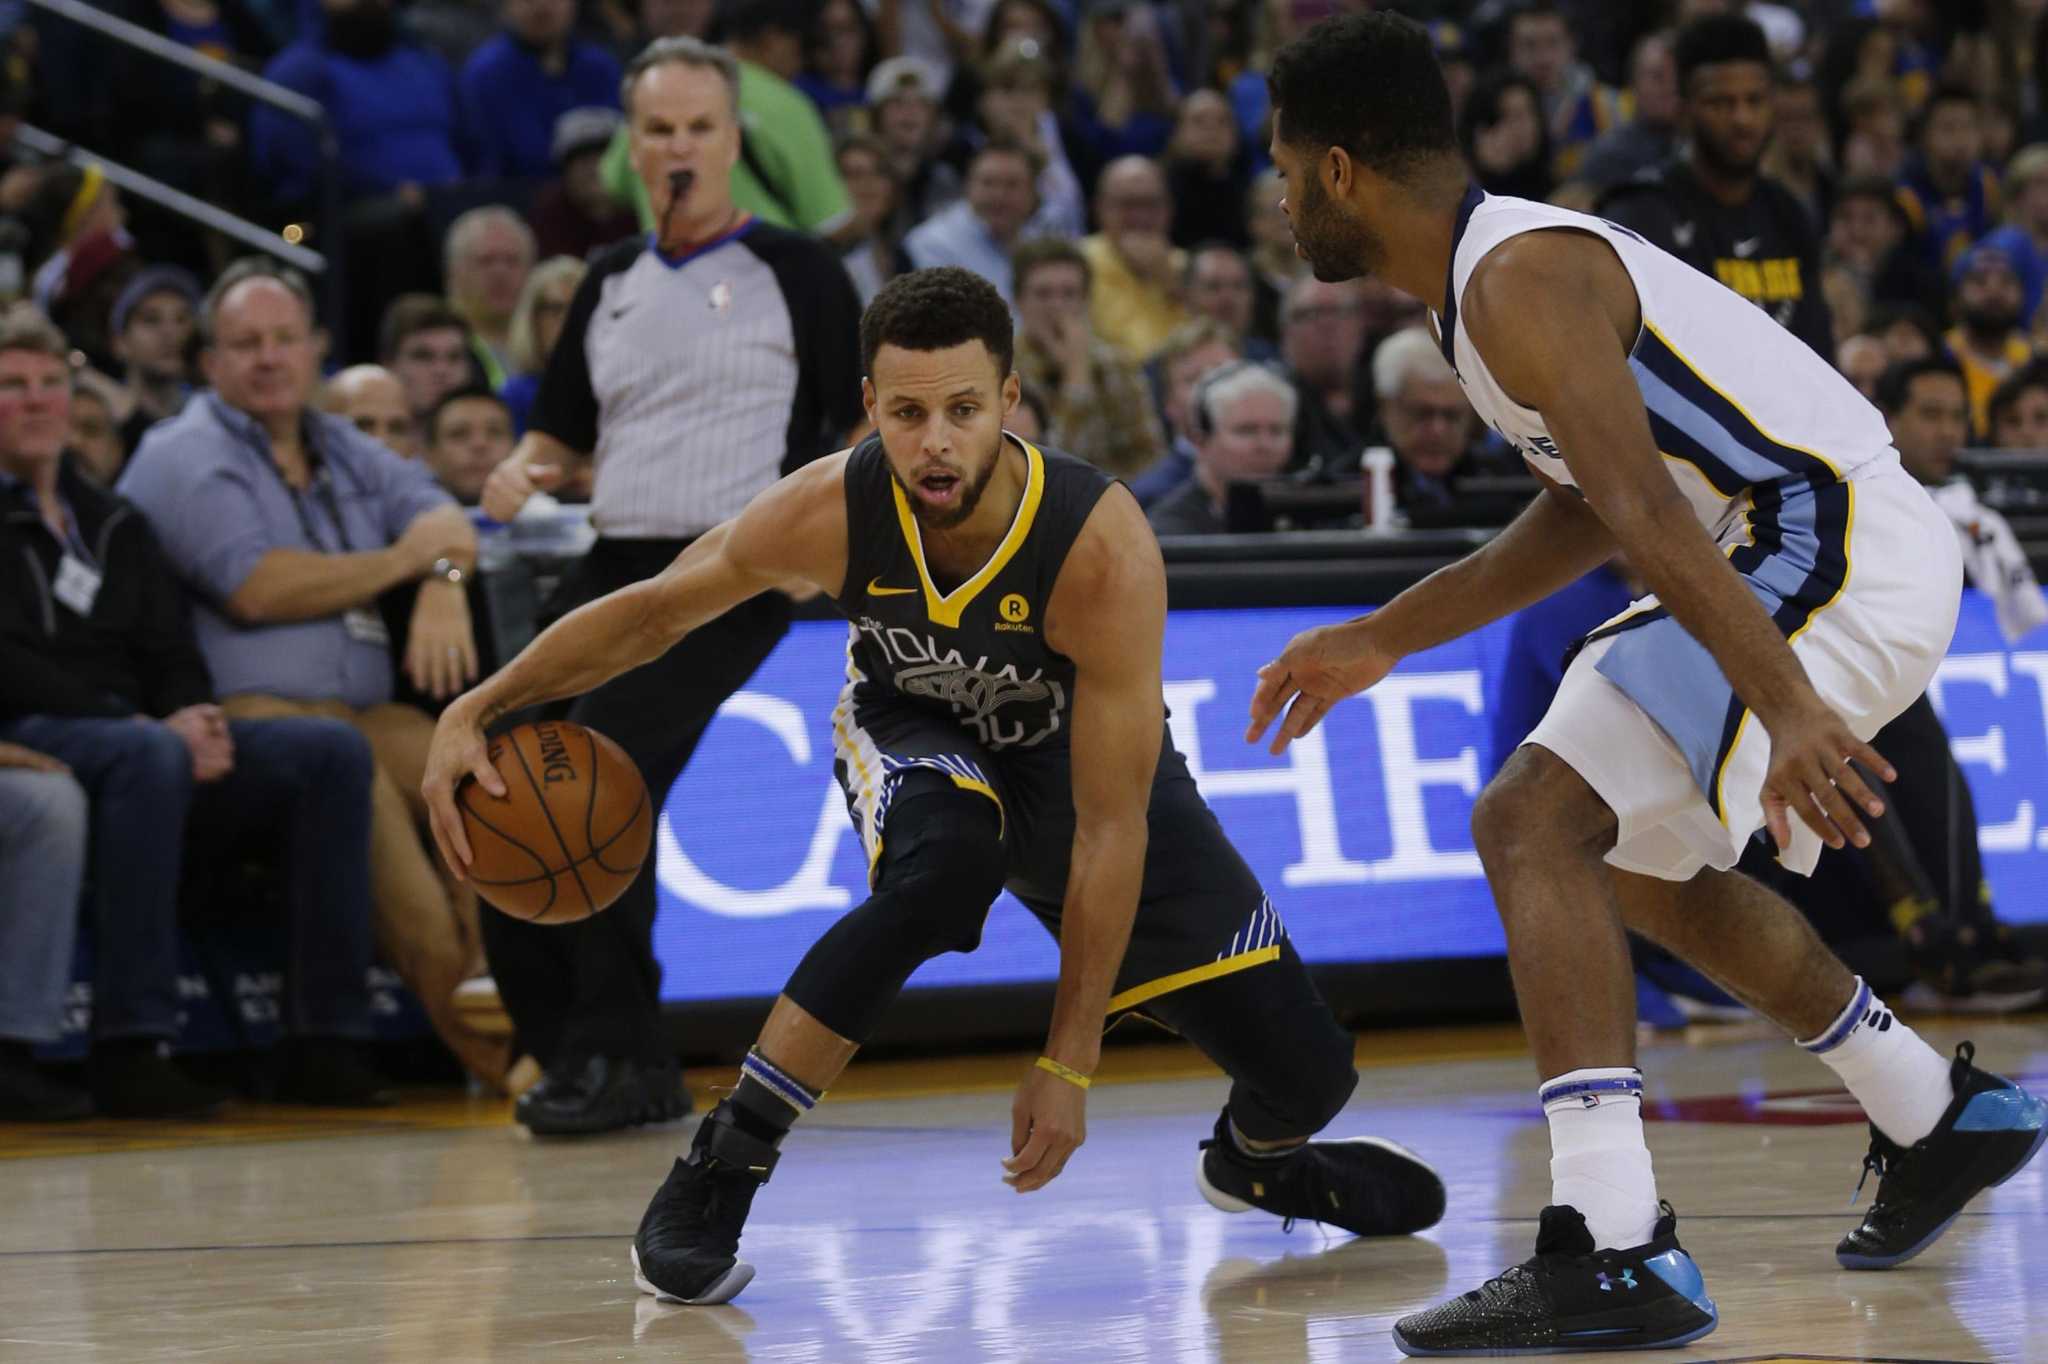 Stephen Curry dazzles in first game back from injury as Warriors rout Memphis - SFGate